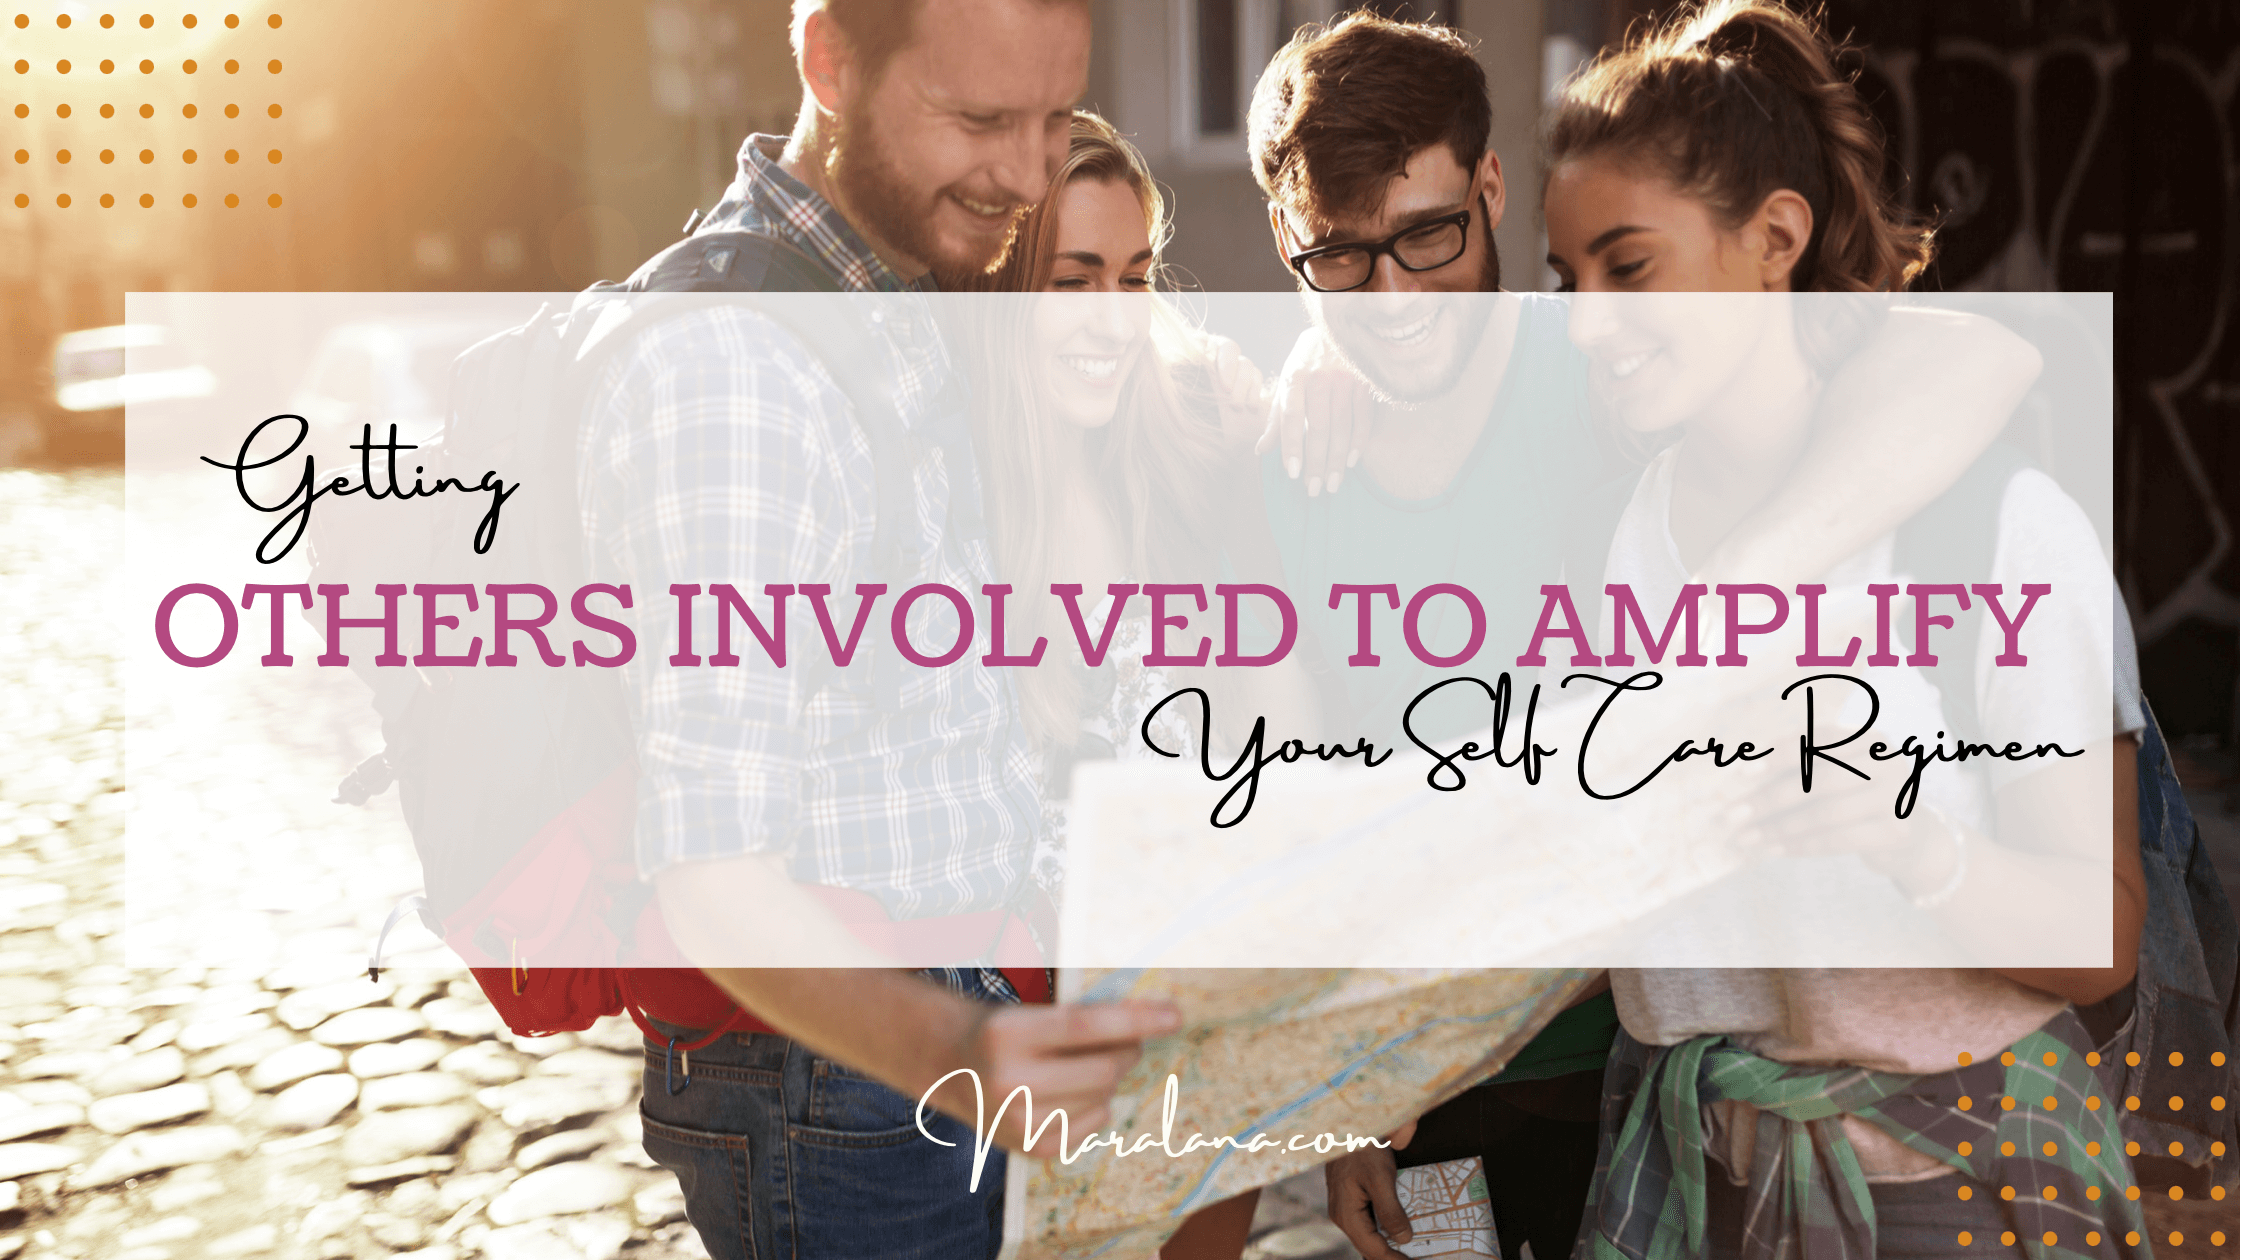 Getting Others Involved to Amplify Your Self Care Regimen